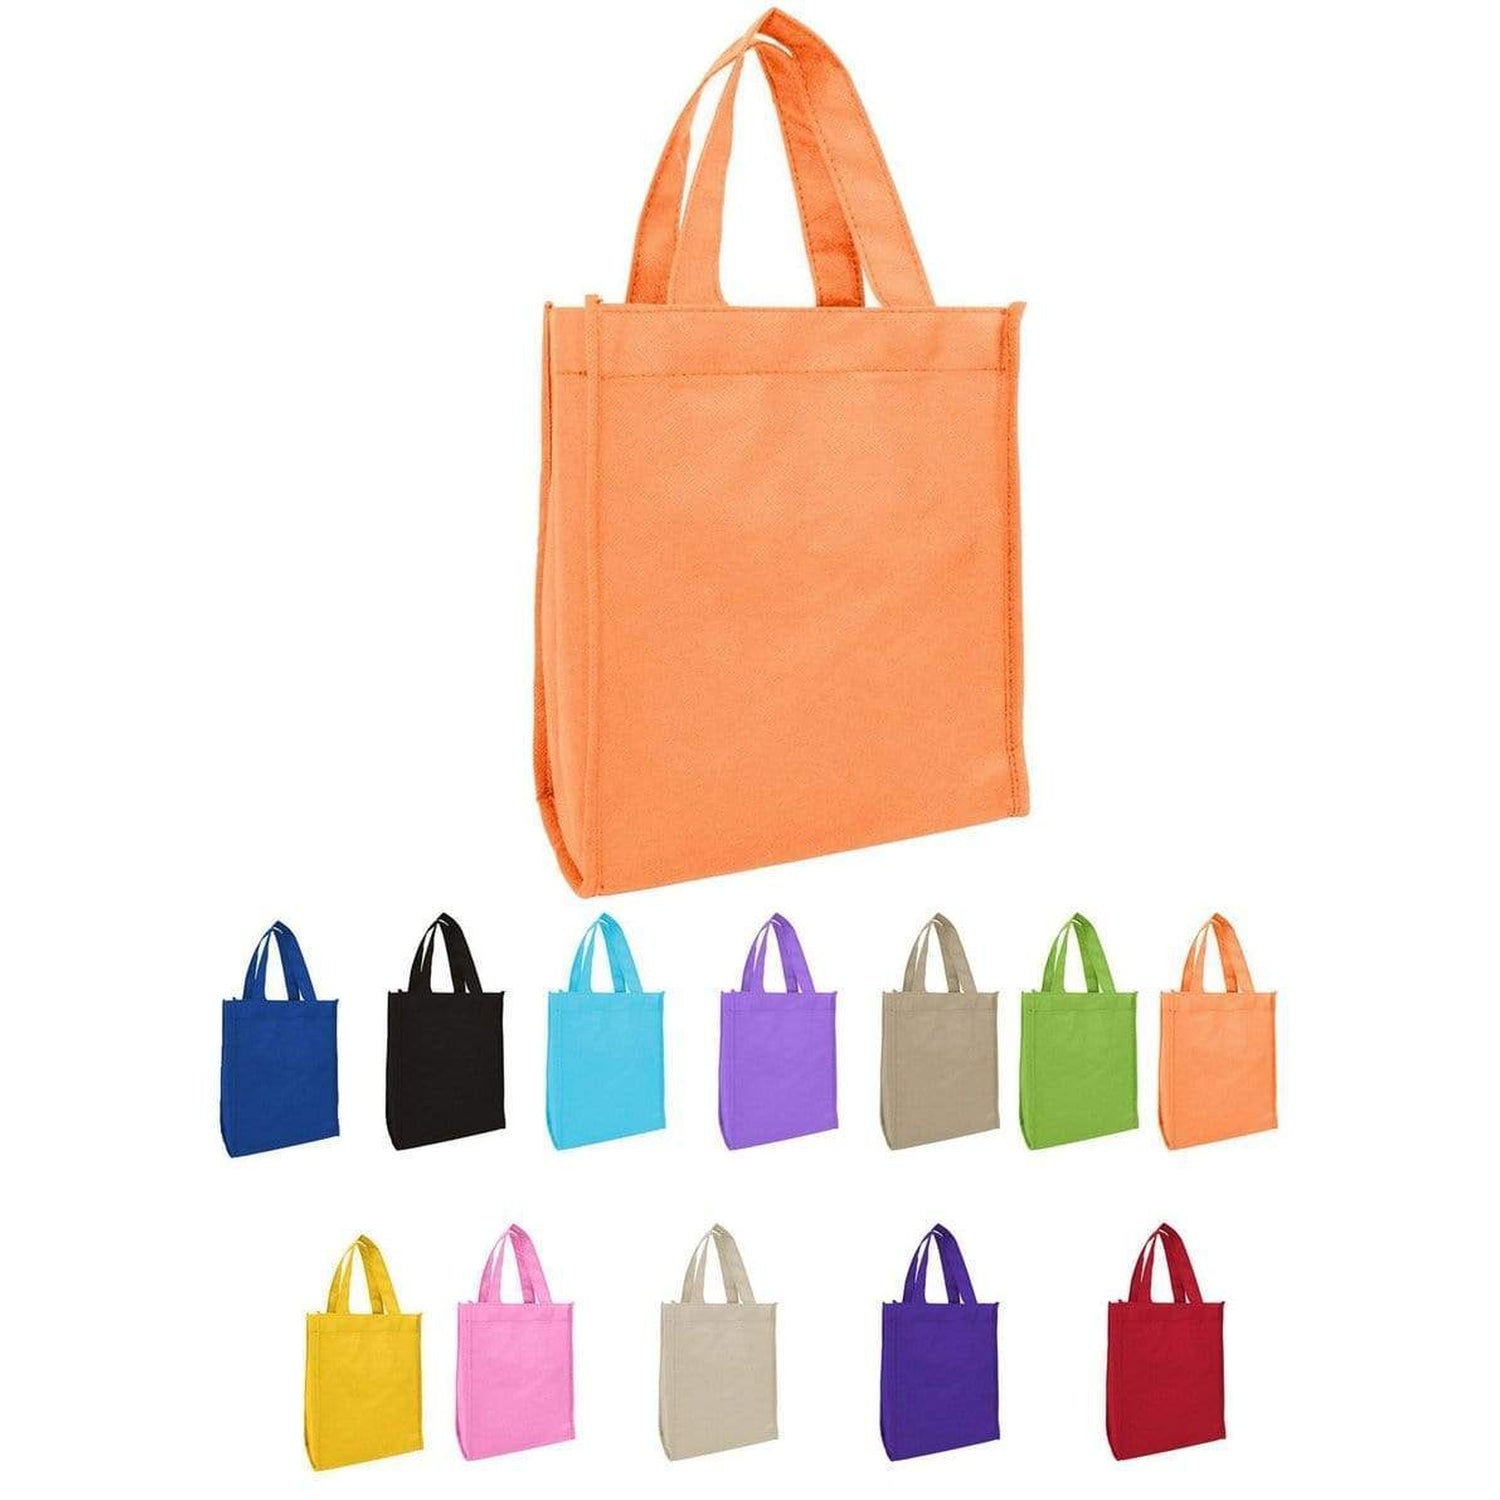 Small Tote Bags in Bulk - Non-Woven Gusseted Gift Bags Wholesale ...